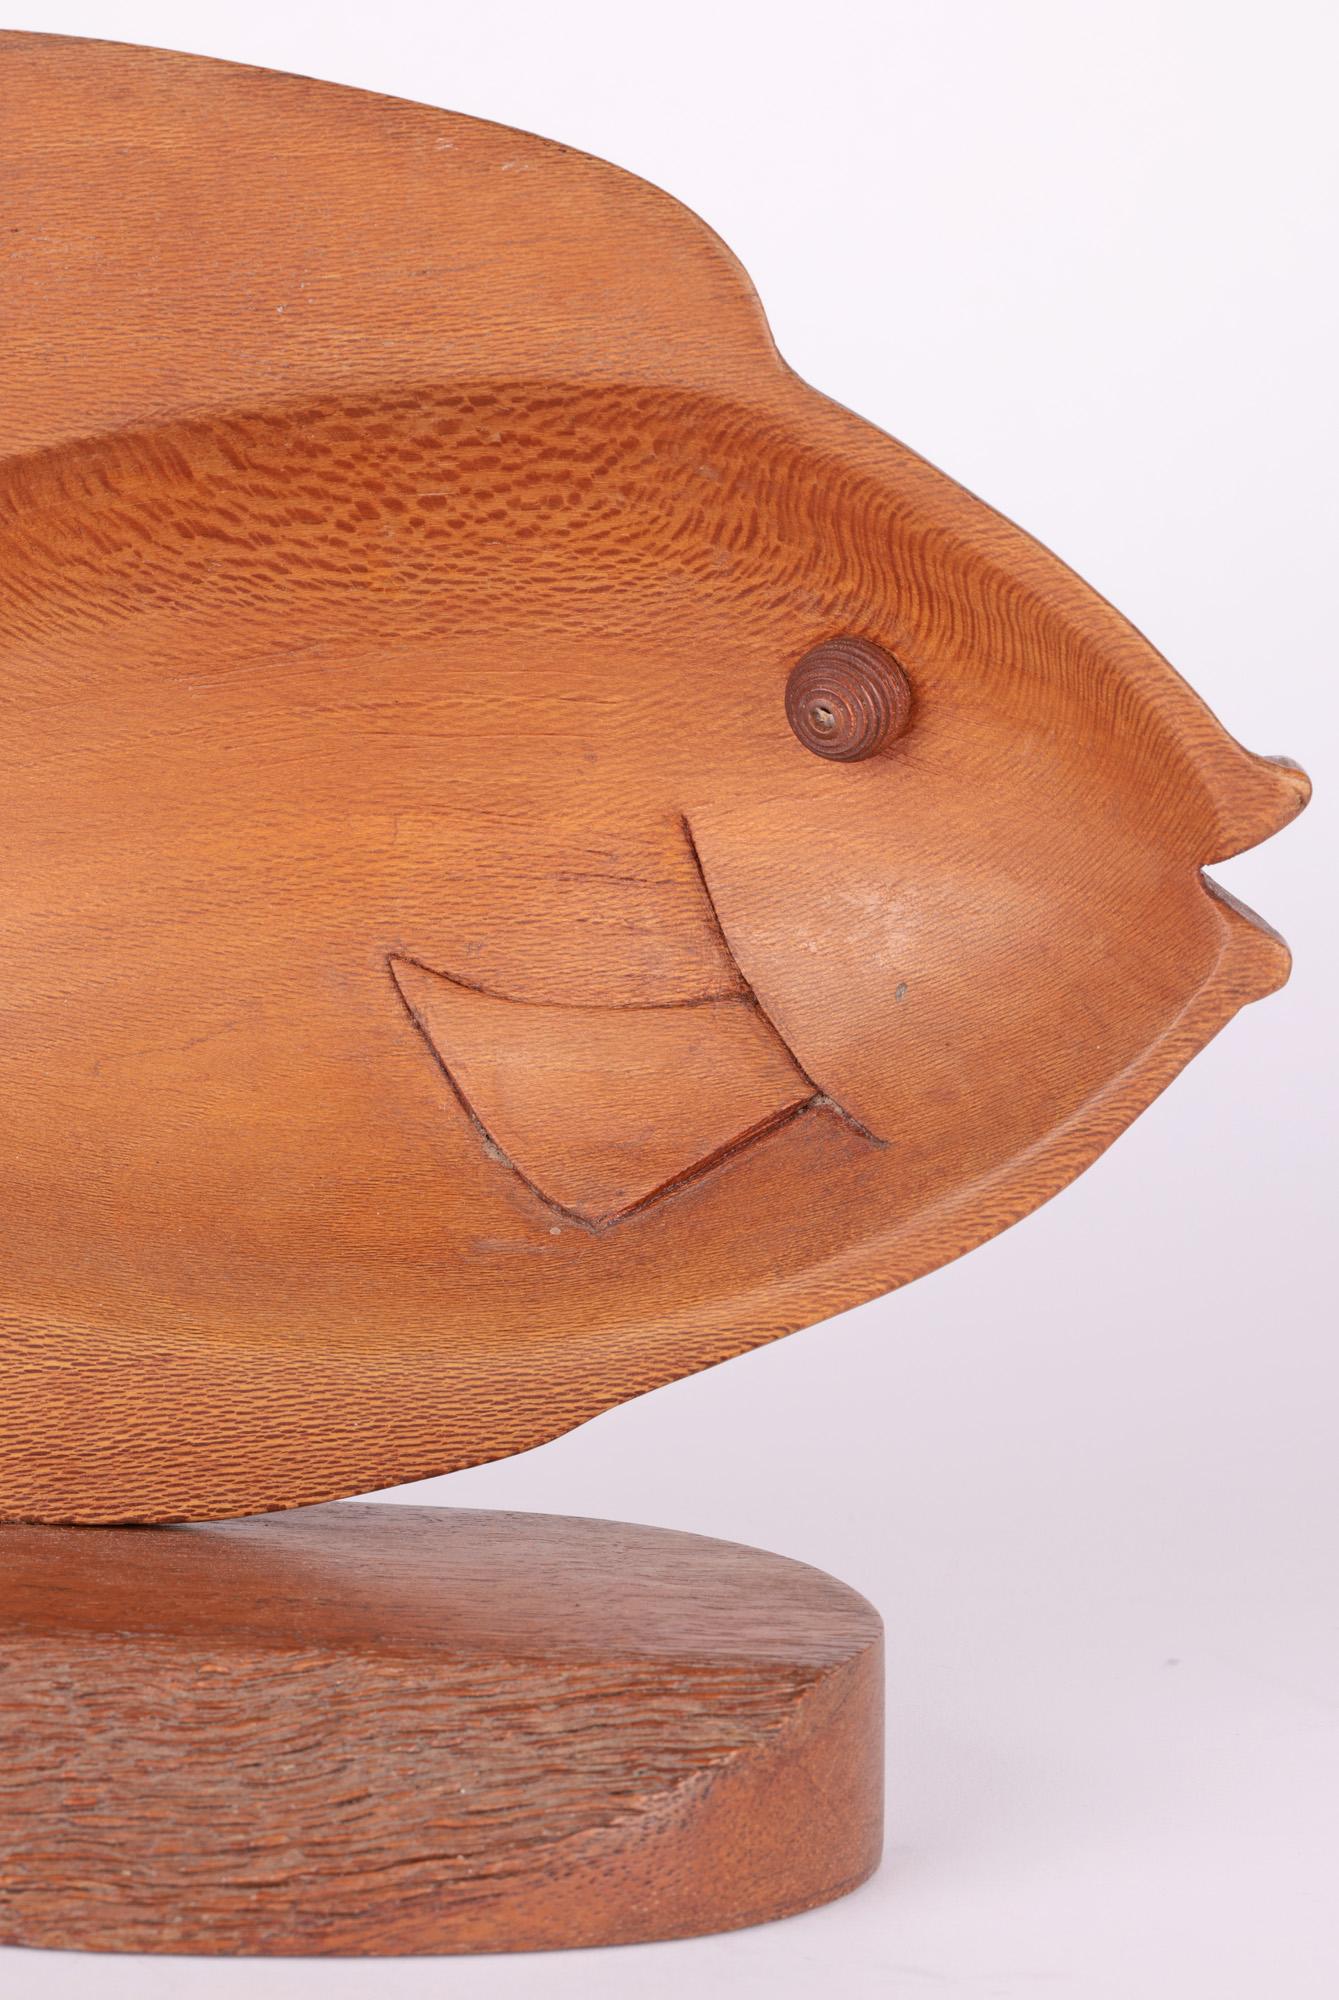 Danish Mid-Century Teak Carved Model of a Fish For Sale 4